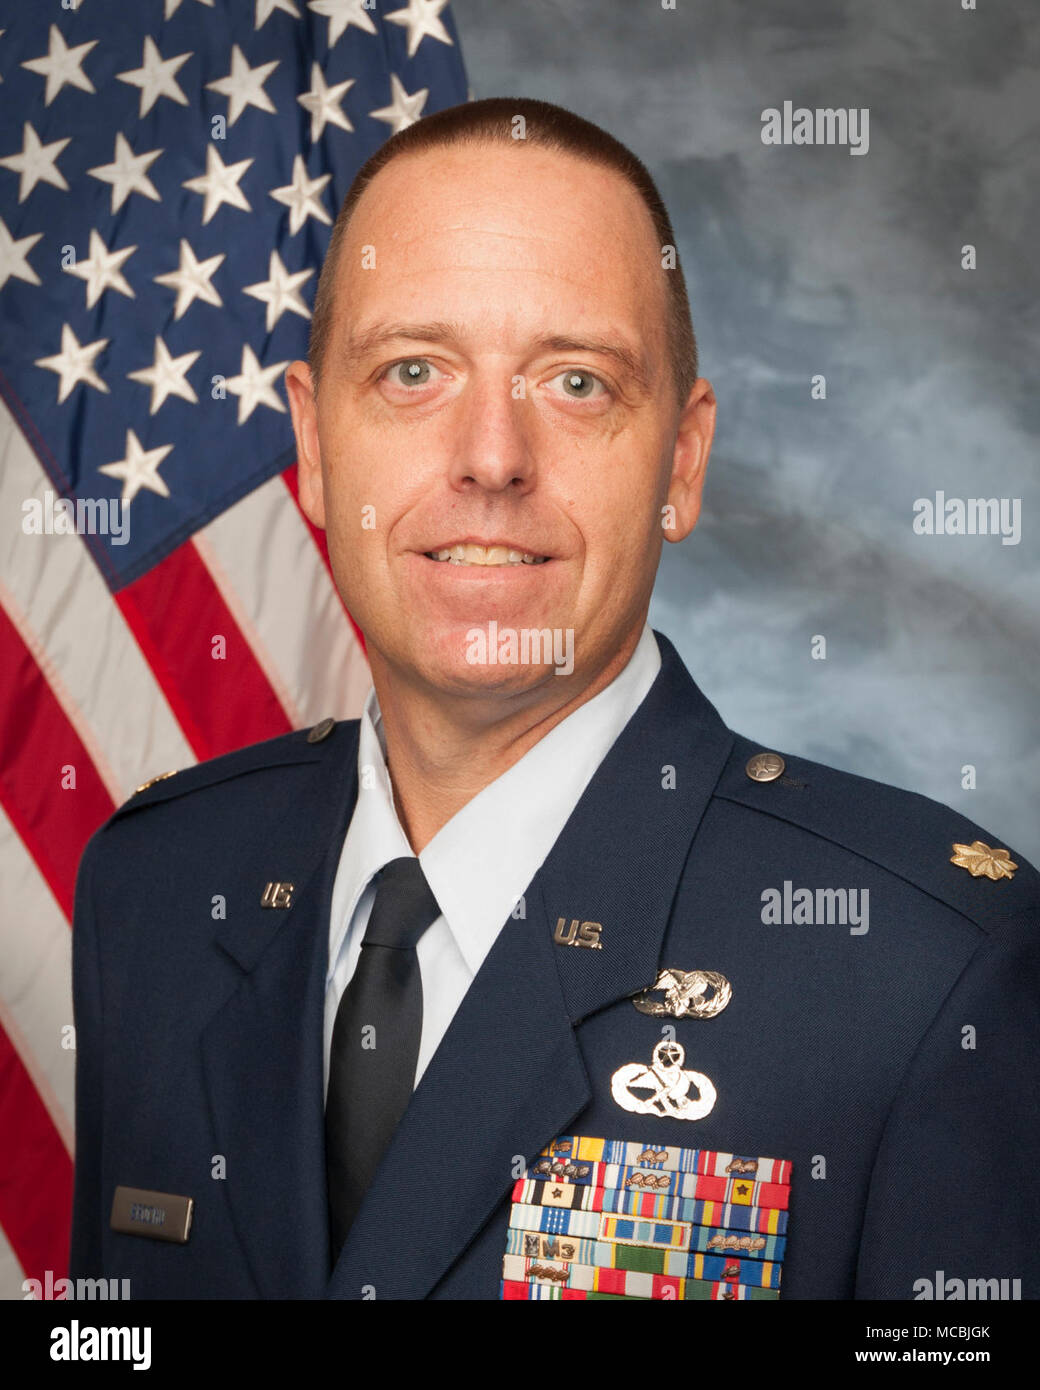 U.S. Air Force Maj. Scott Brochu, 158th Logistics Readiness Squadron operations officer, poses for an official photograph. Stock Photo